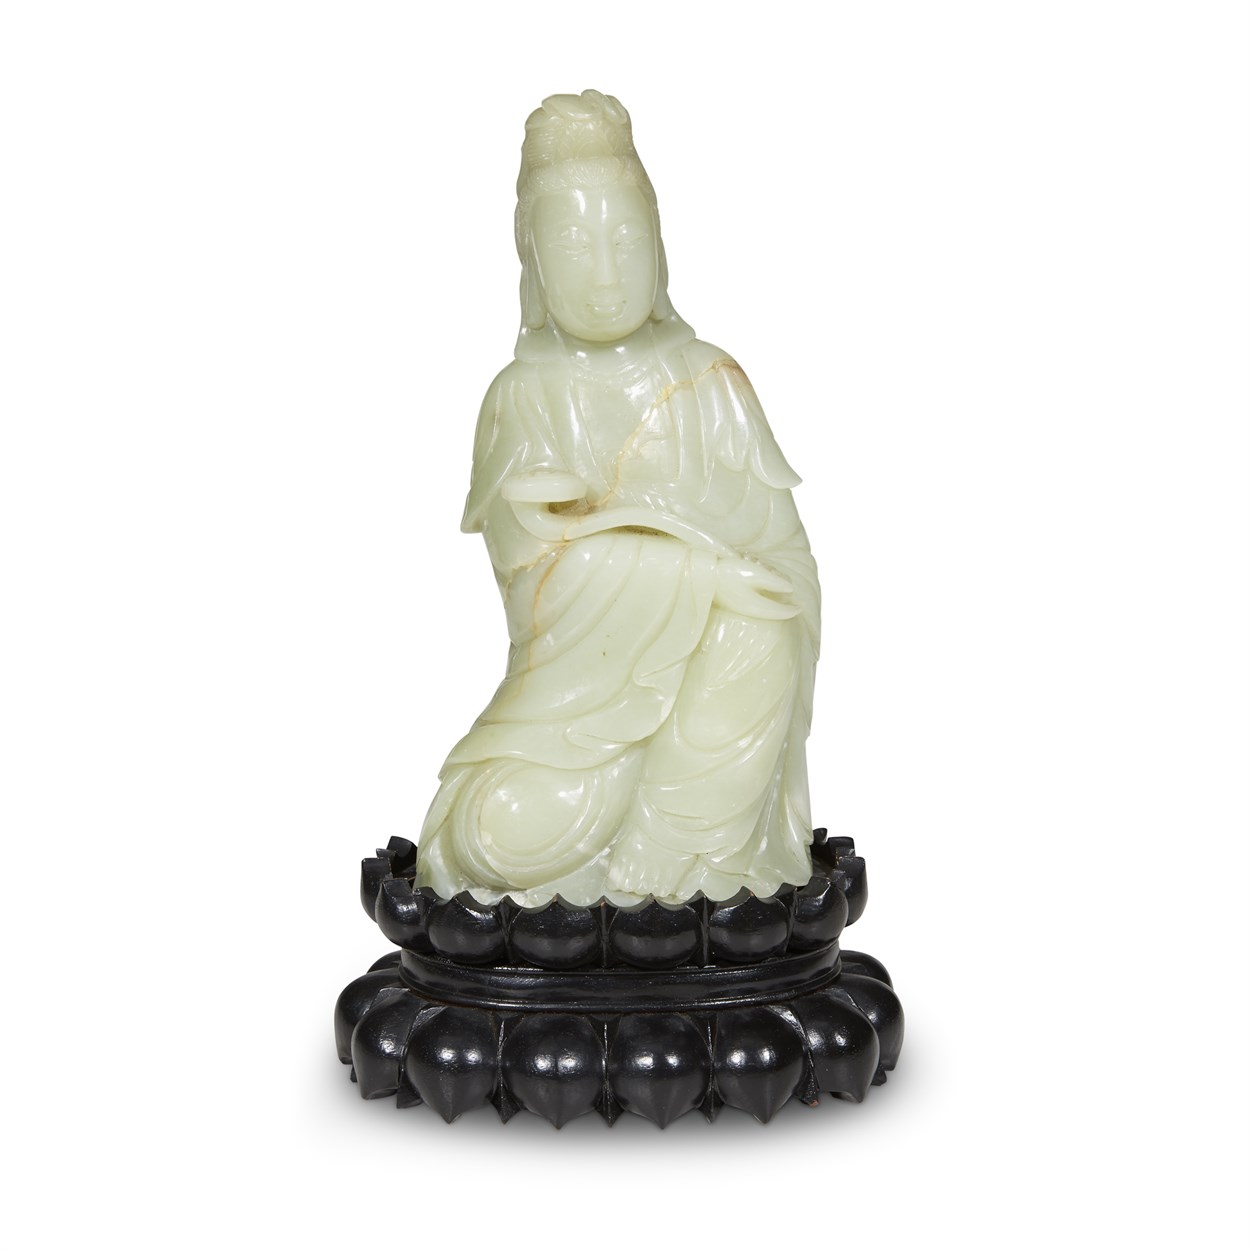 Lot 149 - A Chinese pale celadon jade figure of Guanyin